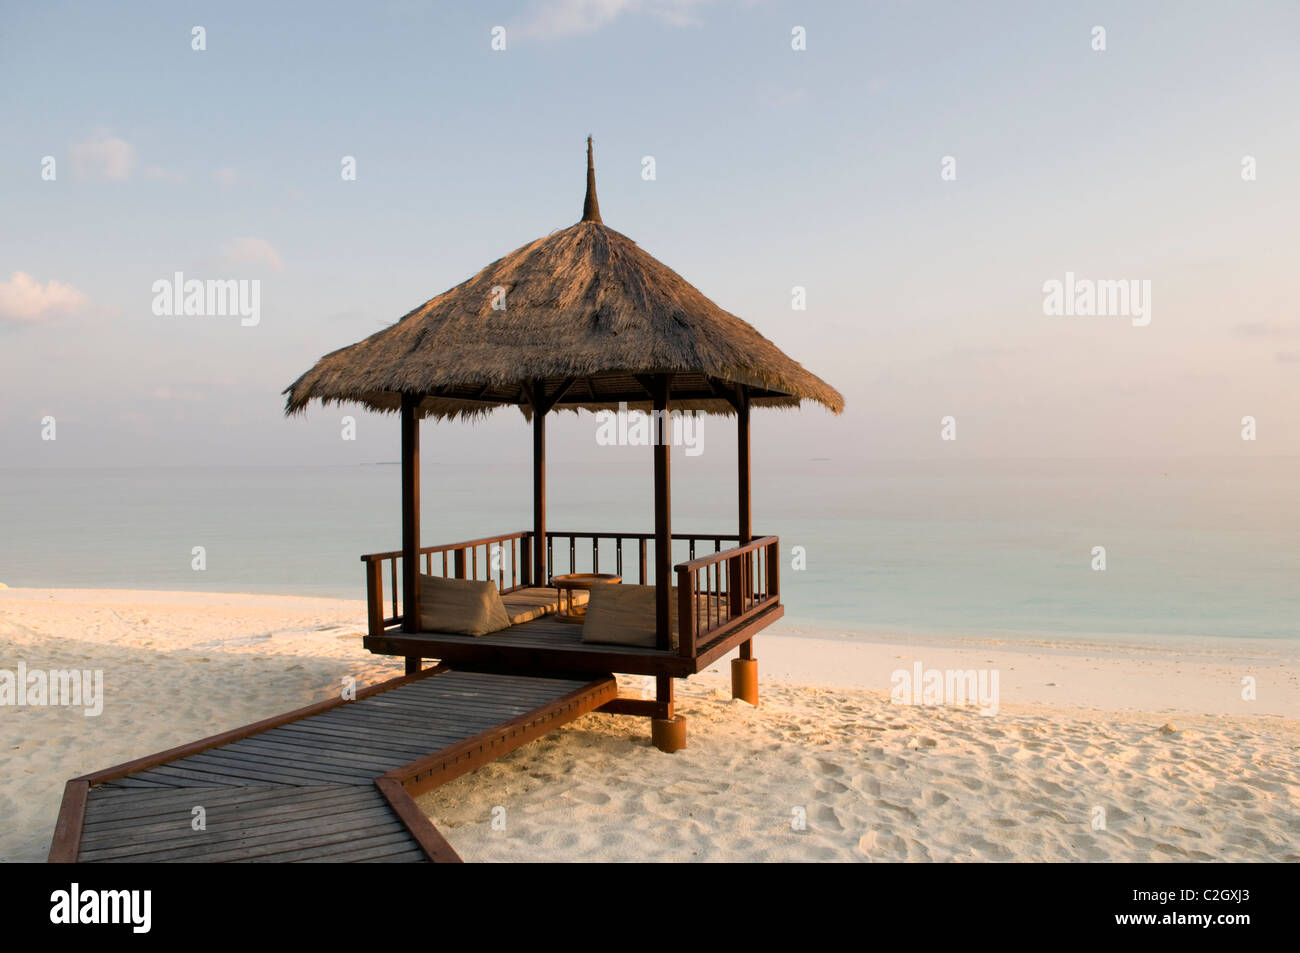 Gazebo with straw roof at a resort in the Maldives Stock Photo - Alamy